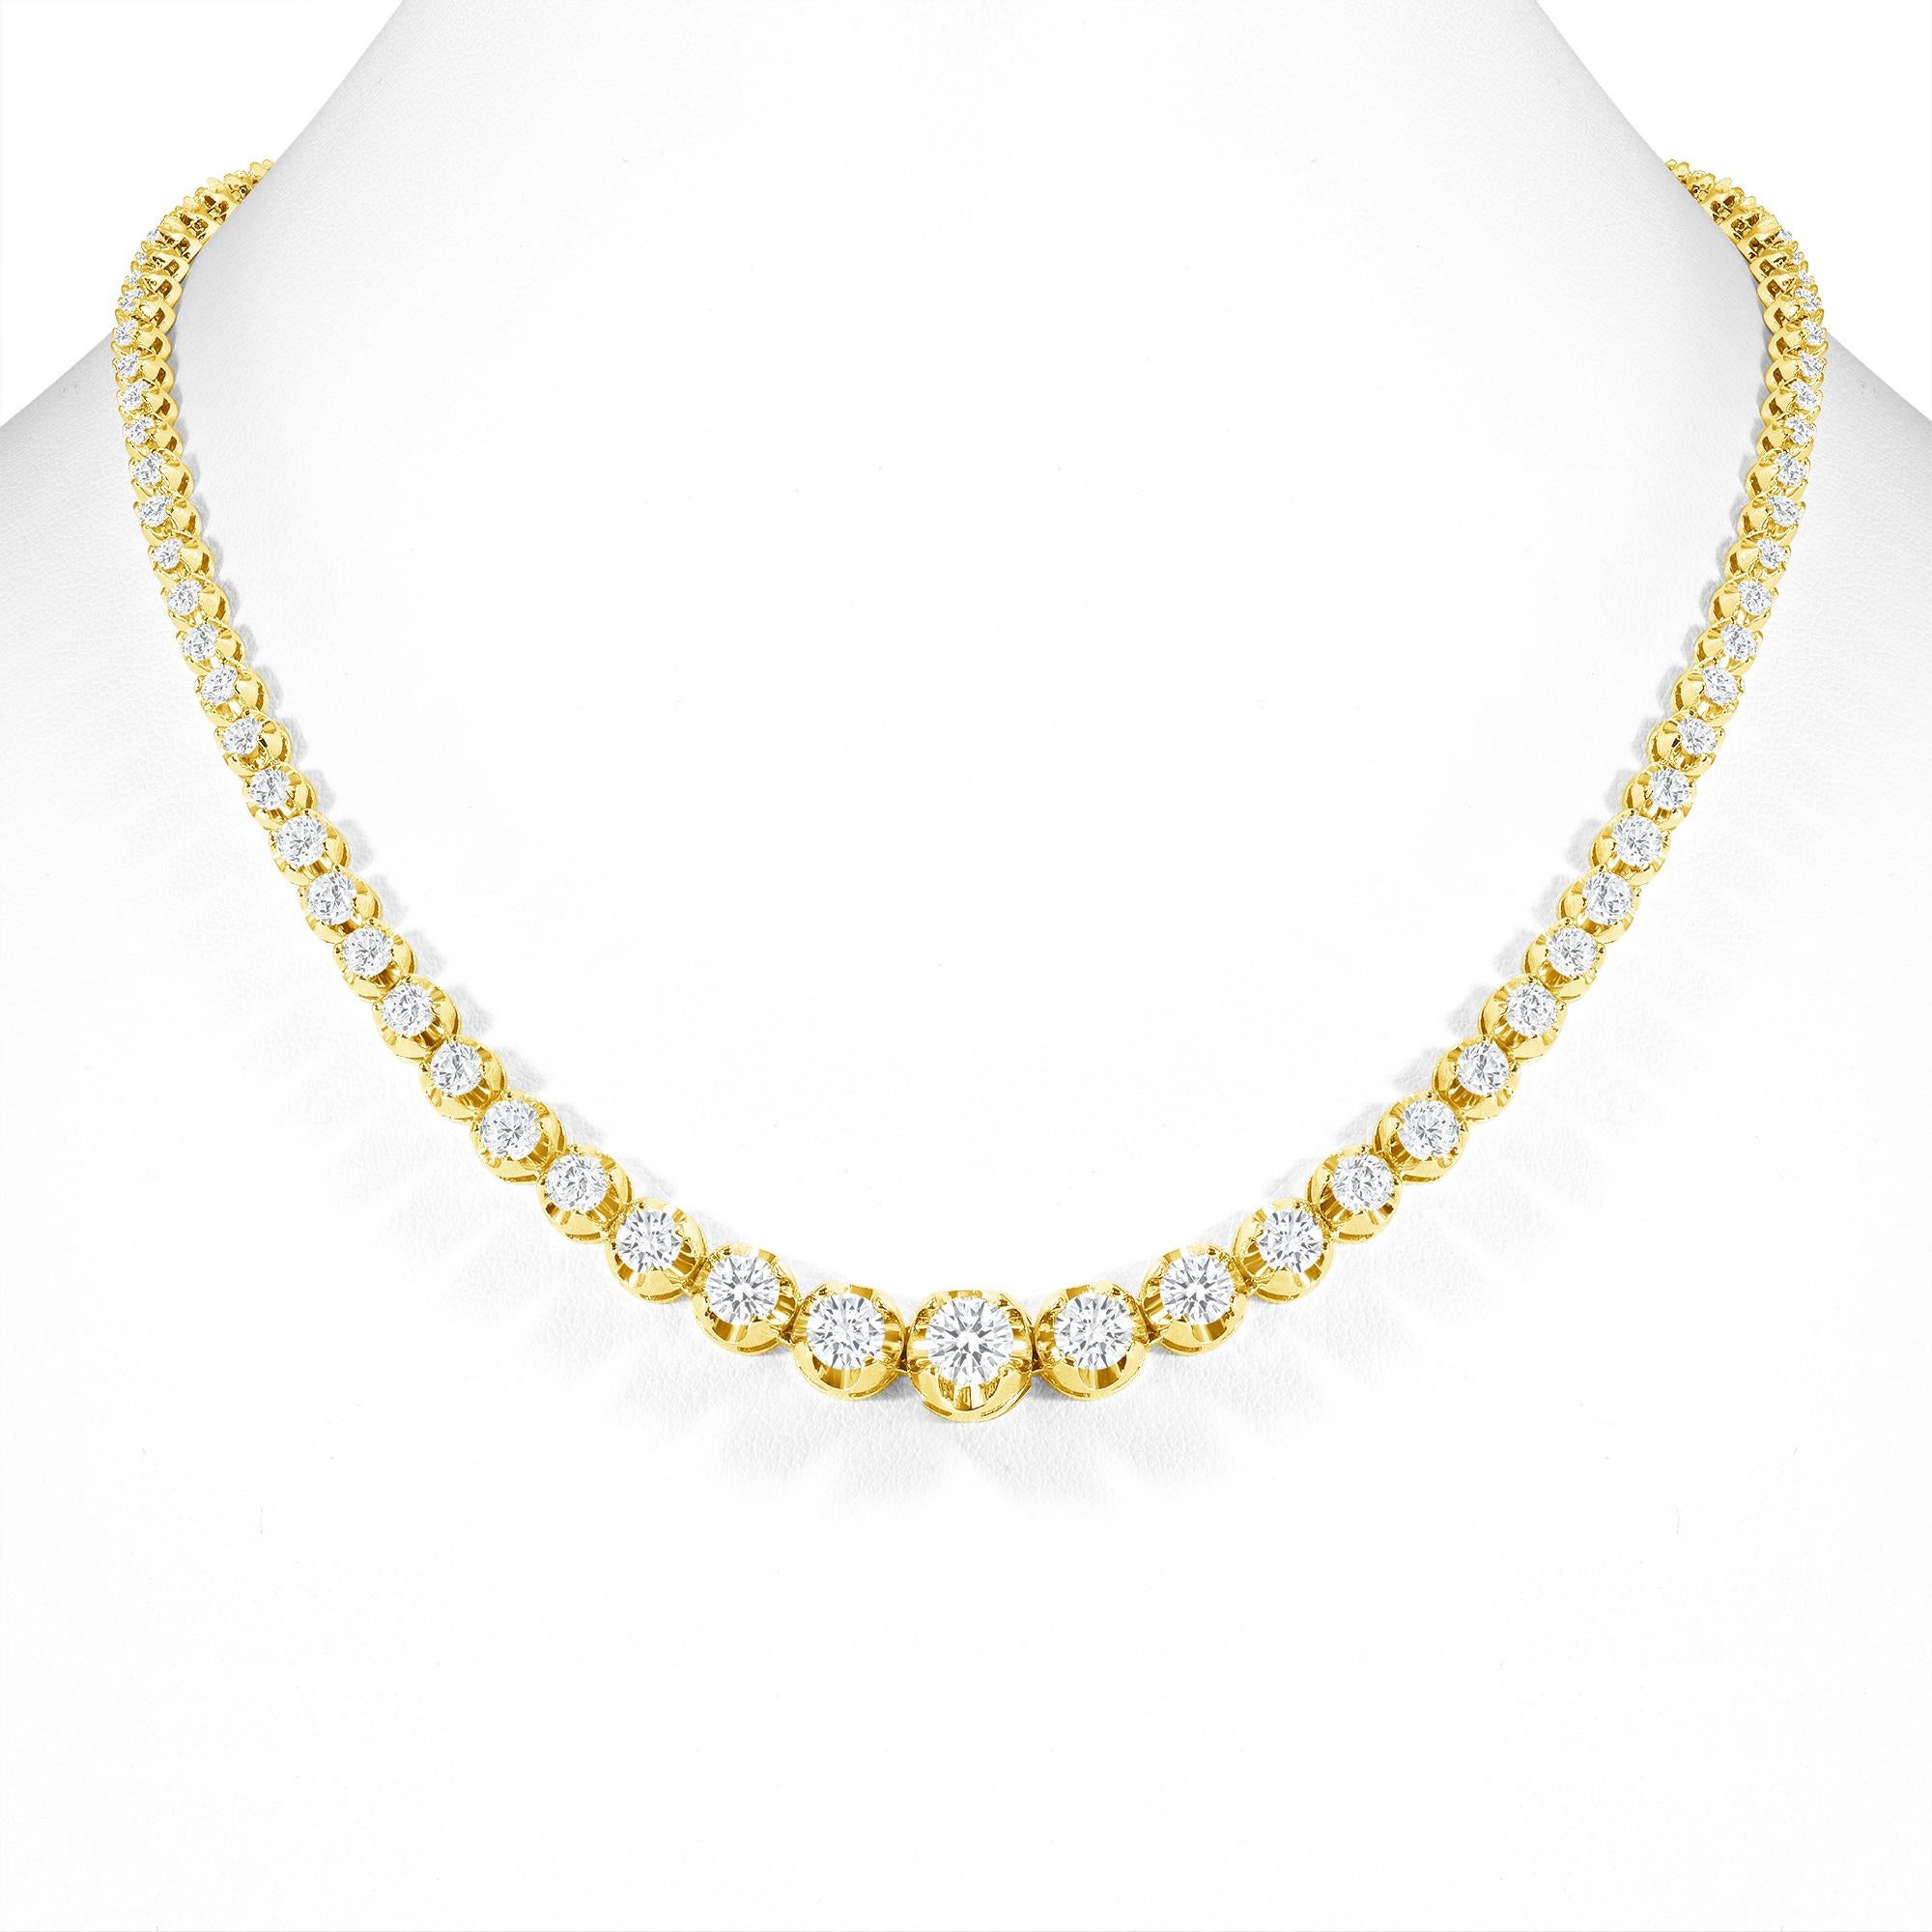 This finely made graduated necklace with beautiful round diamonds sits elegantly on any neck. 

Metal: 14k Gold
Diamond Cut: Round
Total Diamond Approx. Carats:  7ct
Diamond Clarity: VS
Diamond Color: F-G
Size: 16 inches
Color: Yellow Gold
Included